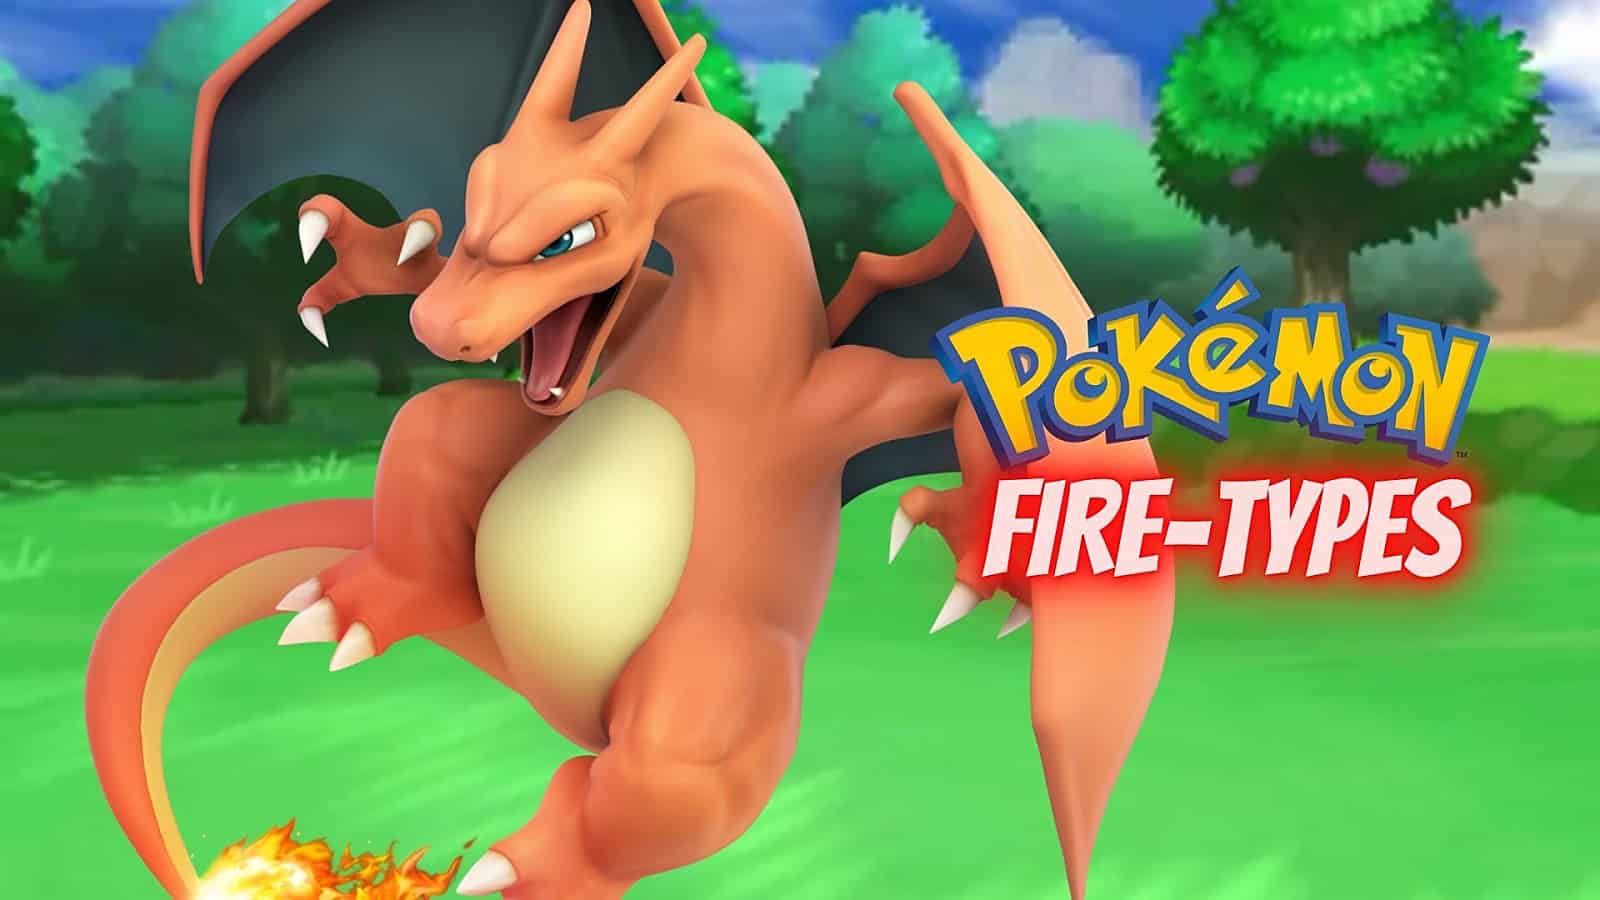 An image of Charizard with the Pokemon logo and 'fire type' in text